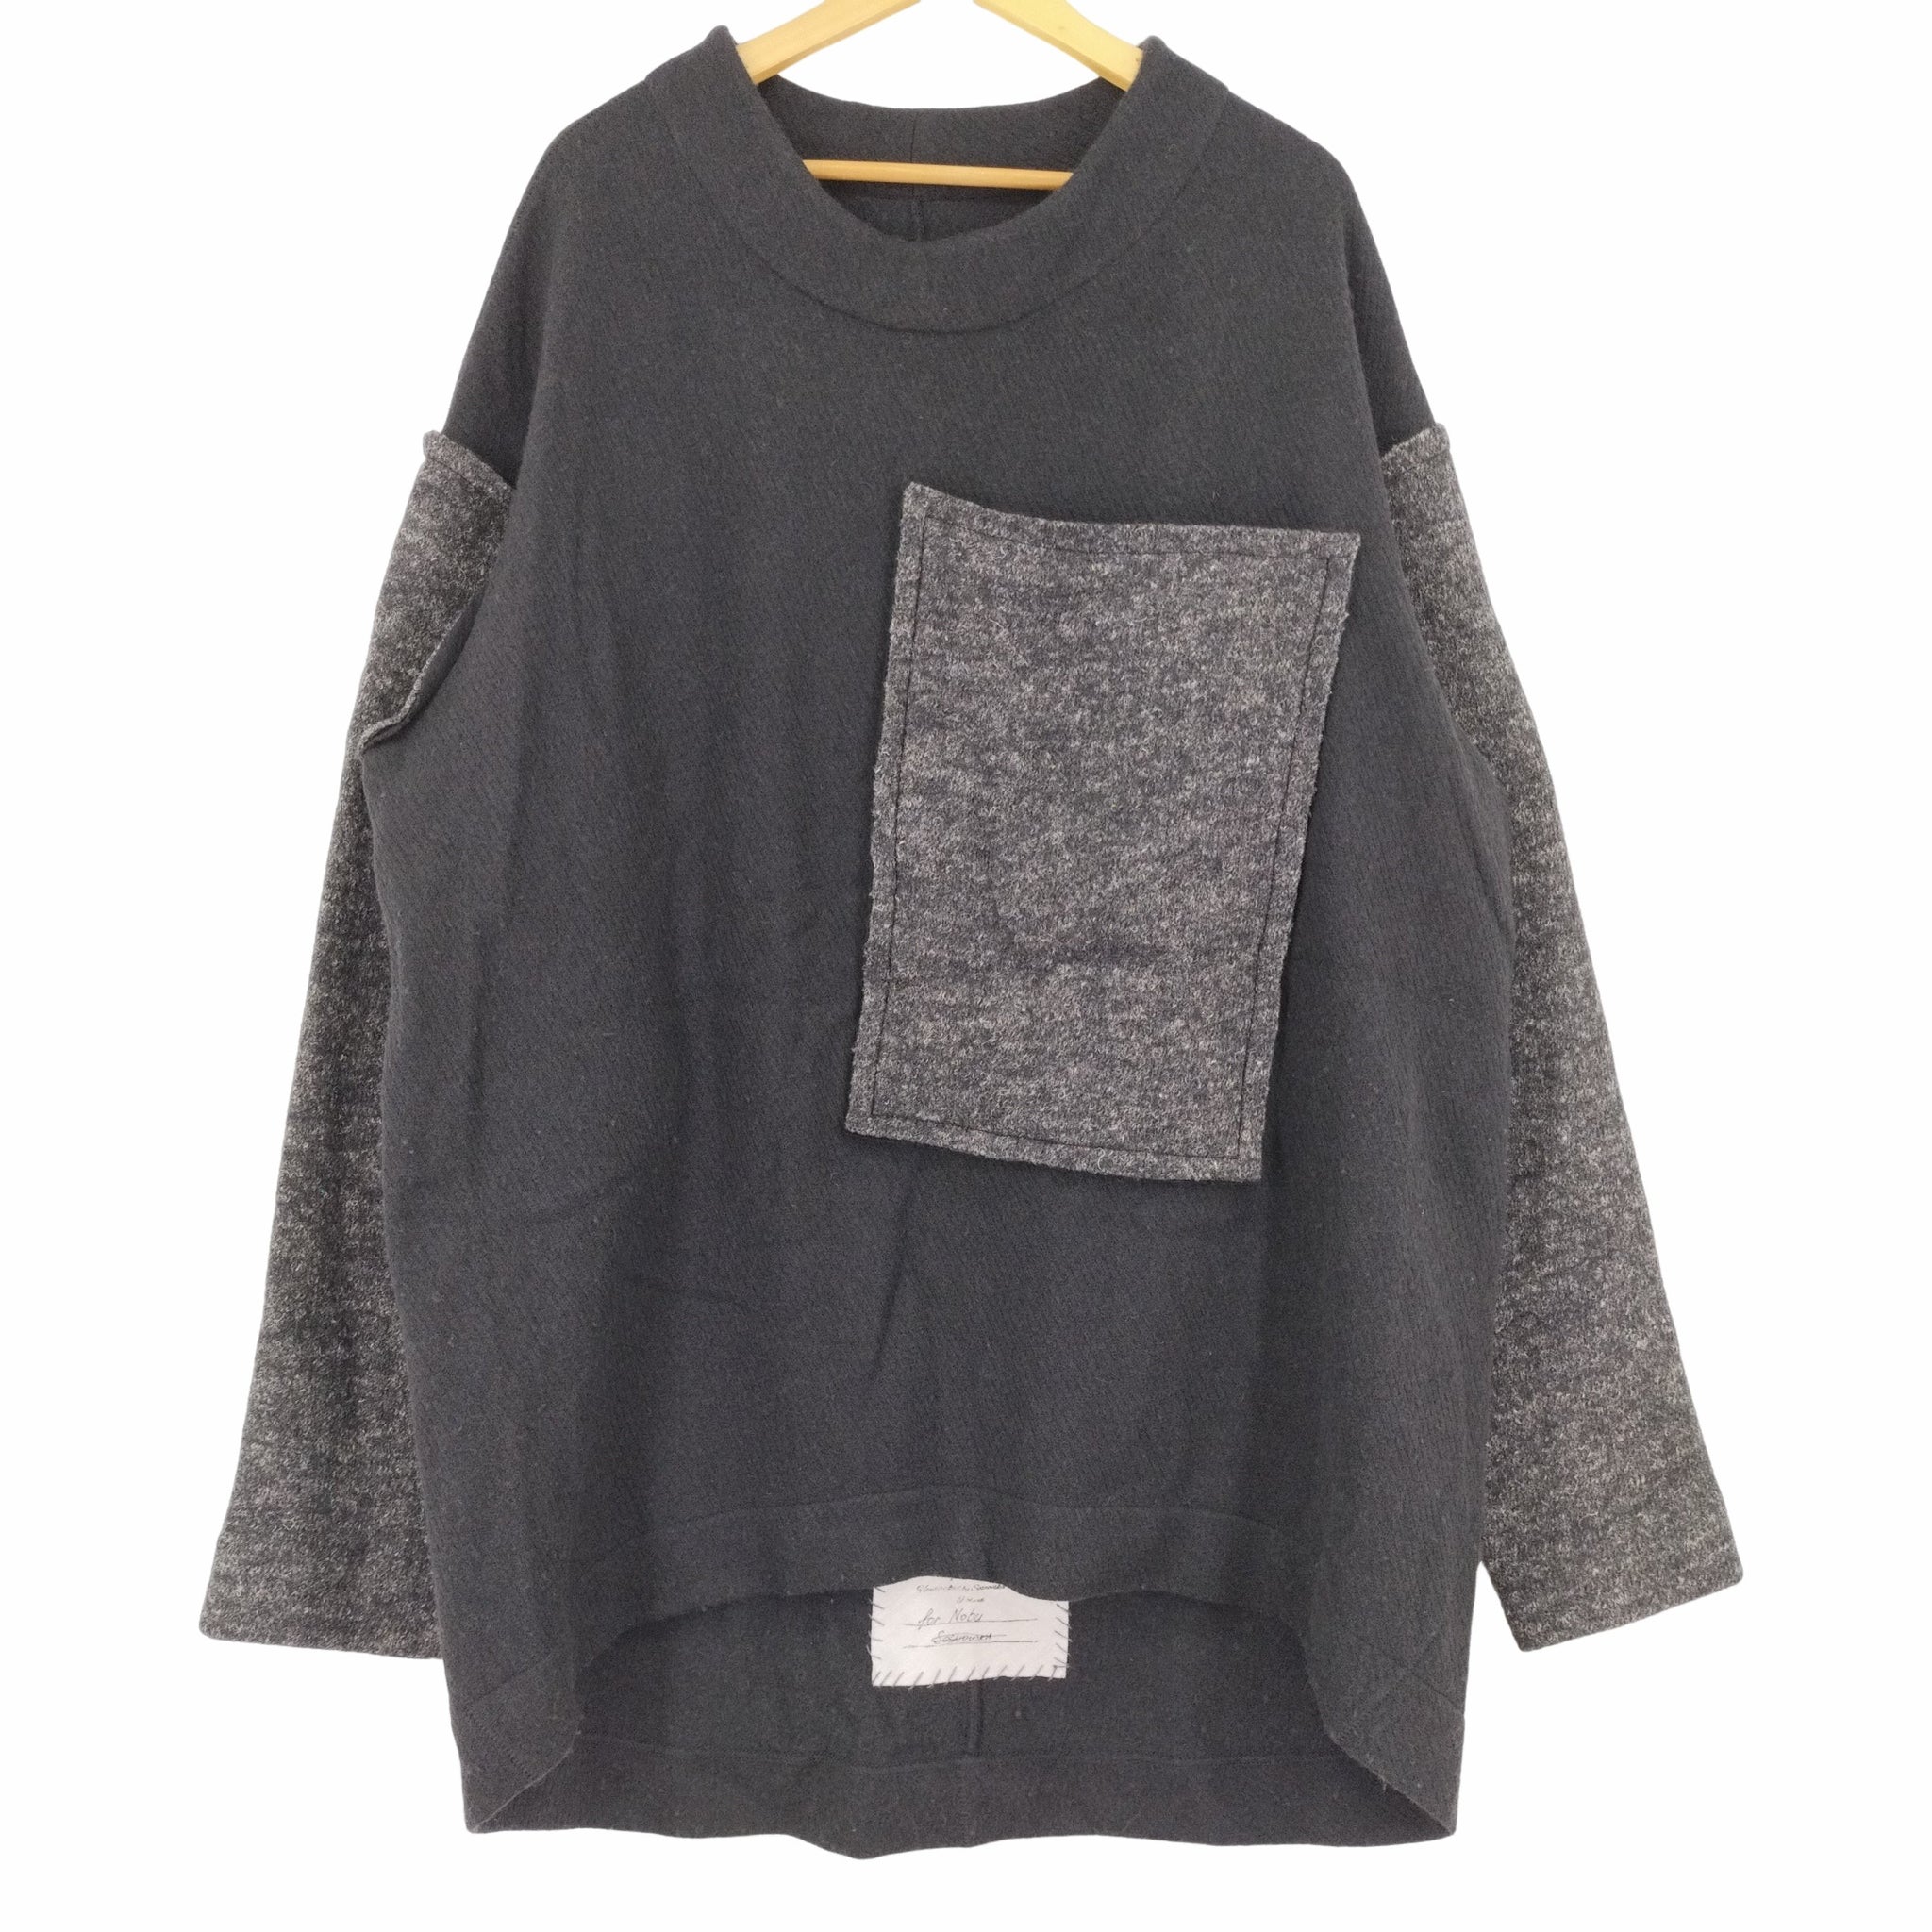 USED古着(ユーズドフルギ){{SOSNOVSKA}} 20AW ATTACHED POCKET KNIT SWEATER ロングセーター